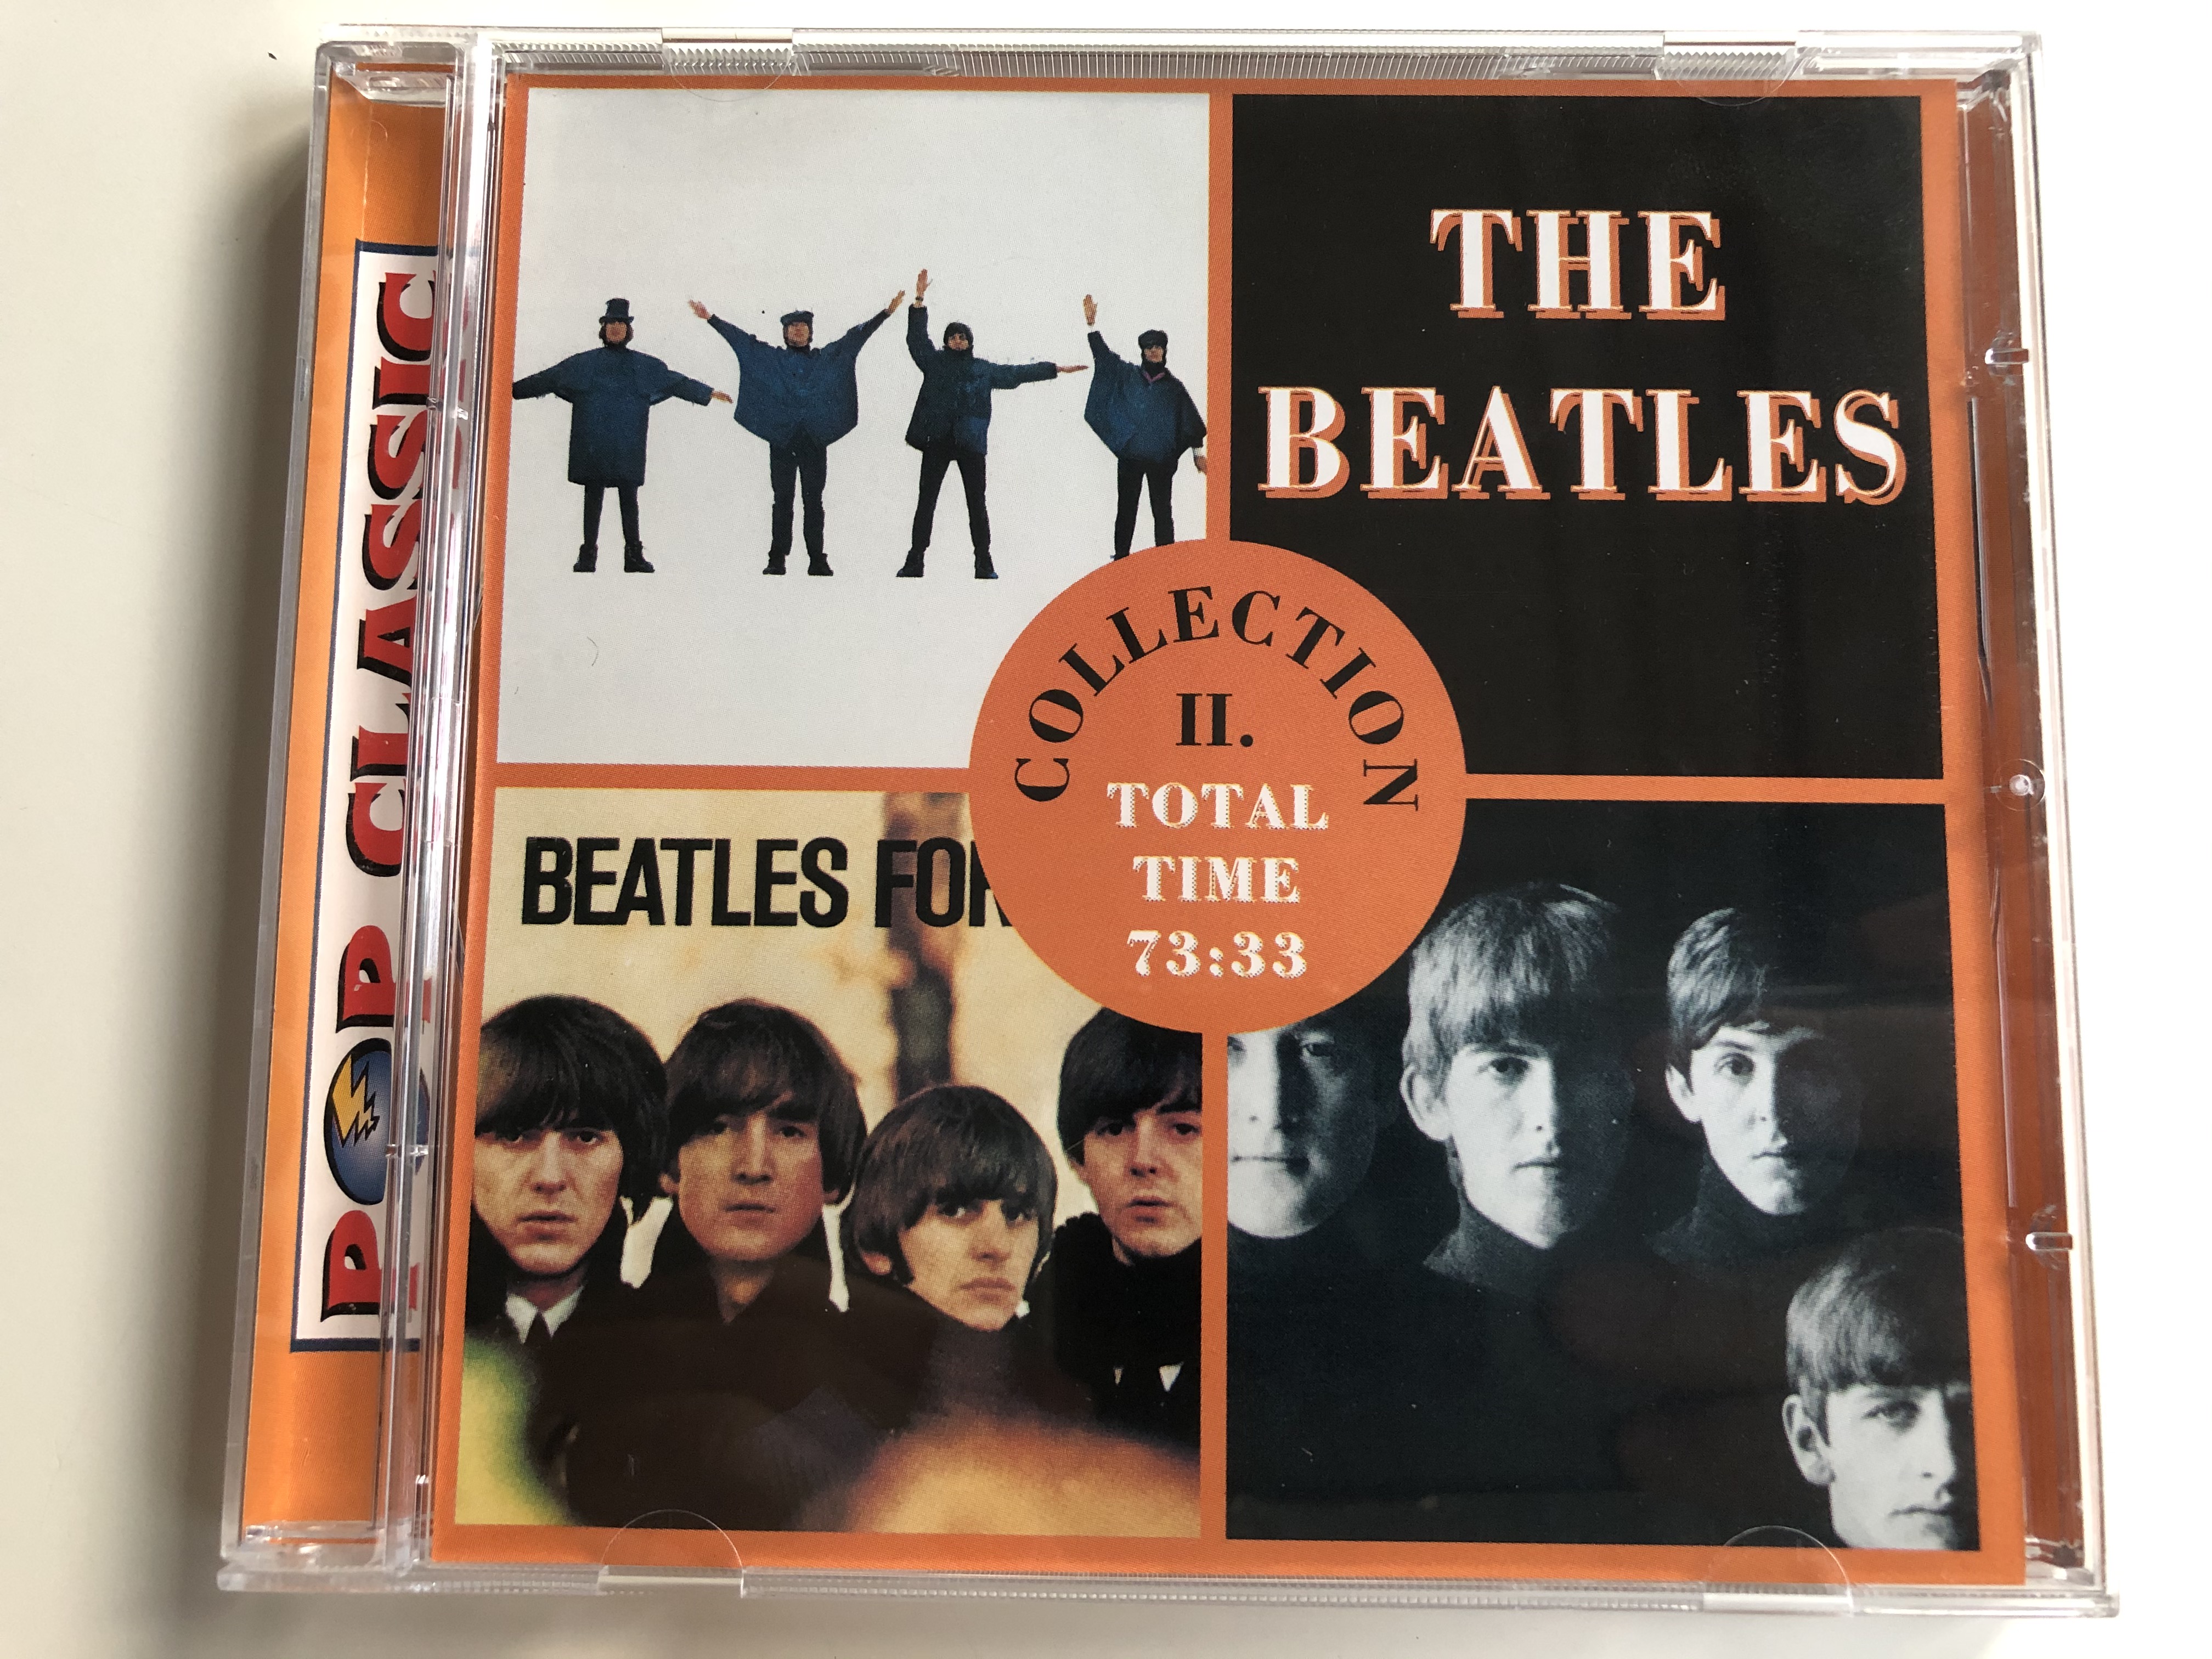 the-beatles-collection-ii.-total-time-7333-pop-classic-euroton-audio-cd-eucd-0040-1-.jpg